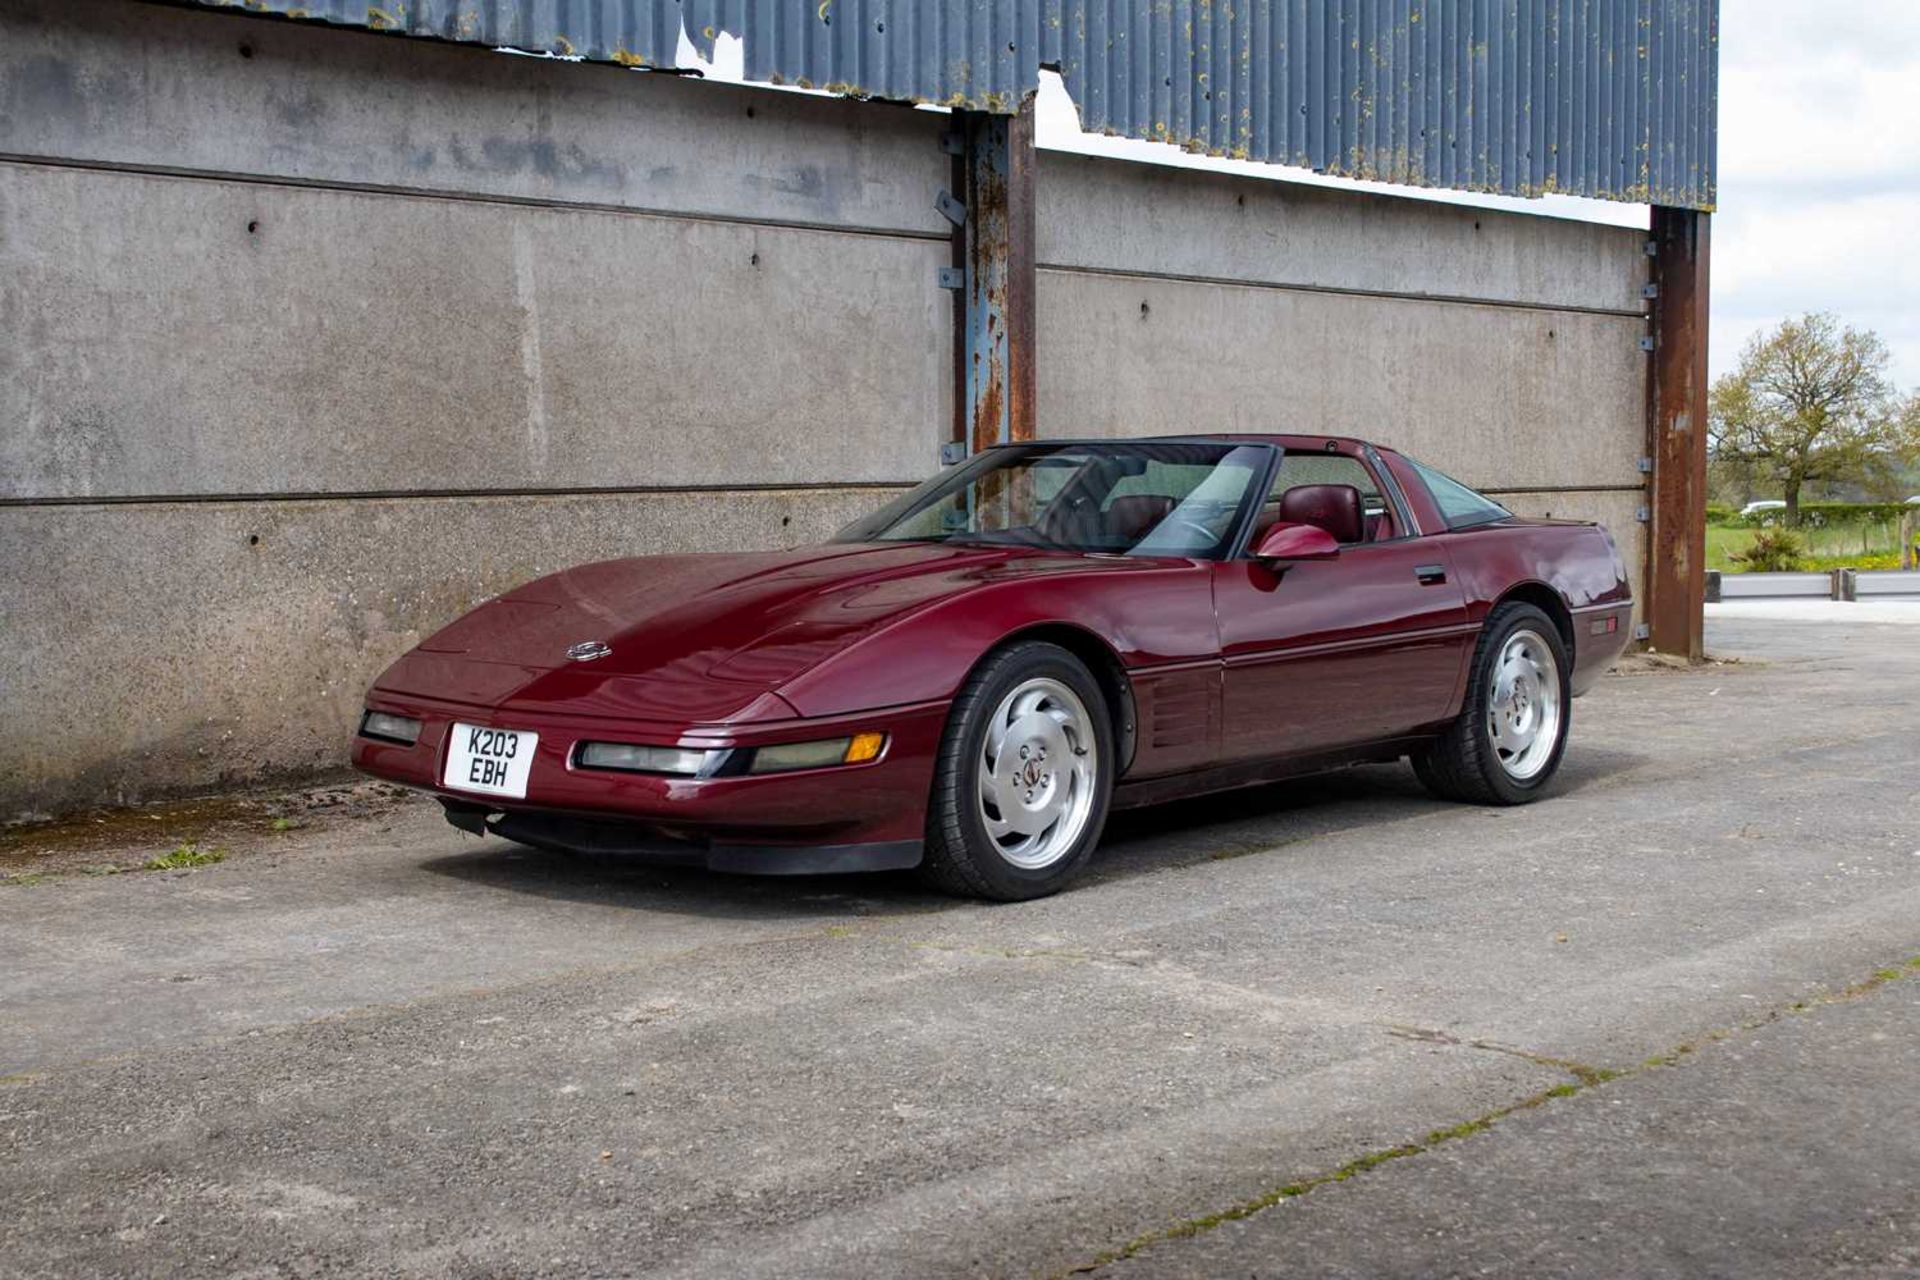 1993 Chevrolet Corvette C4  The highly sought-after 40th Anniversary Edition  - Image 14 of 78